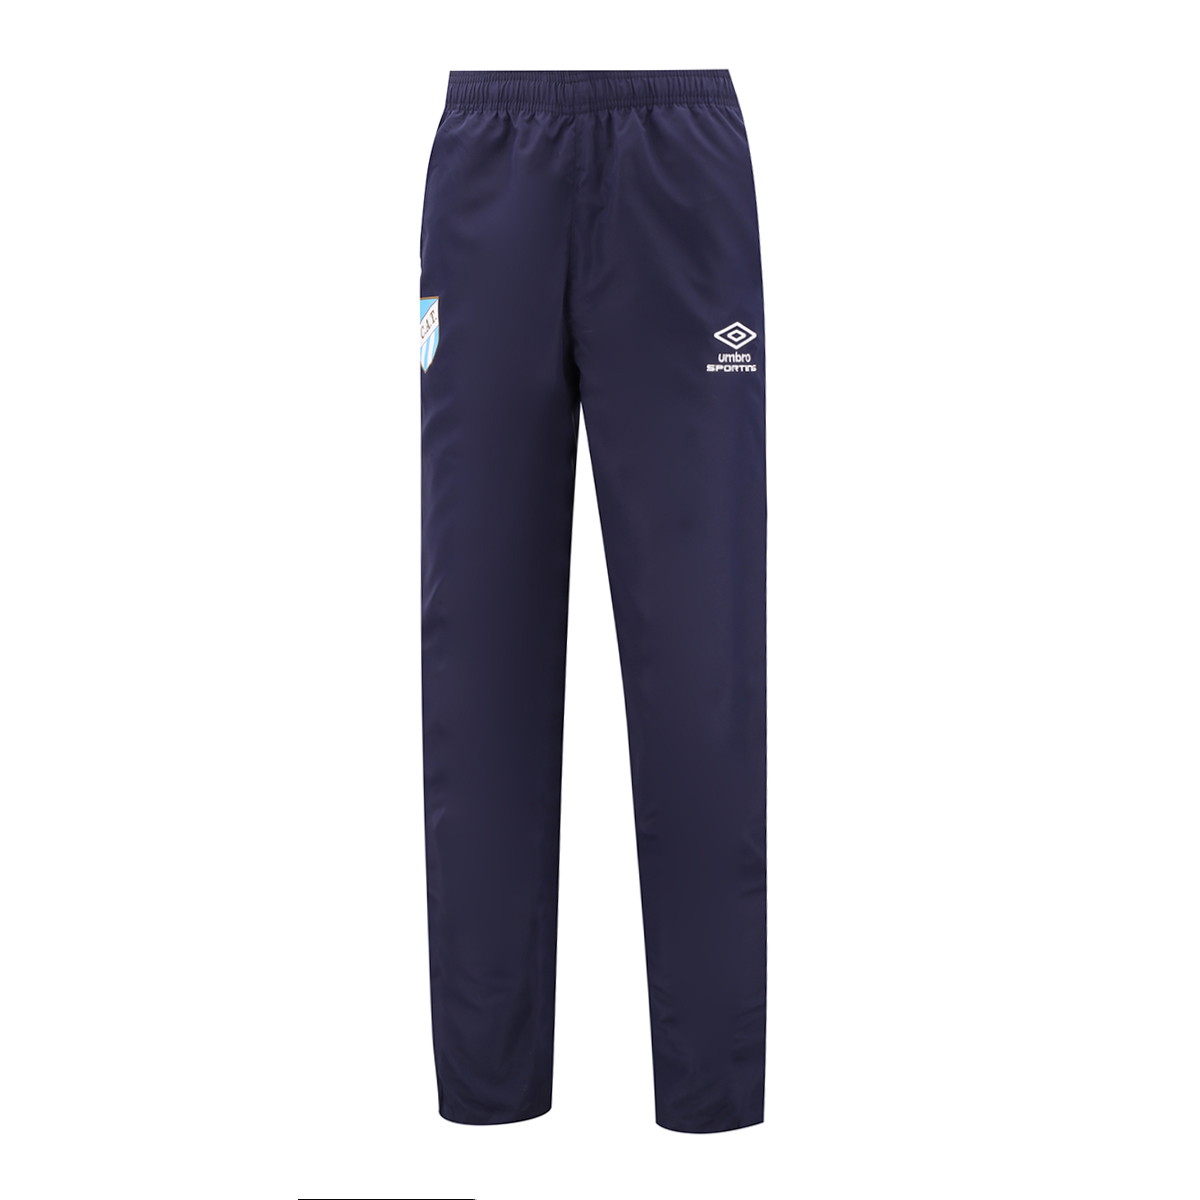 Conjunto Umbro Taylor C.A.T.,  image number null